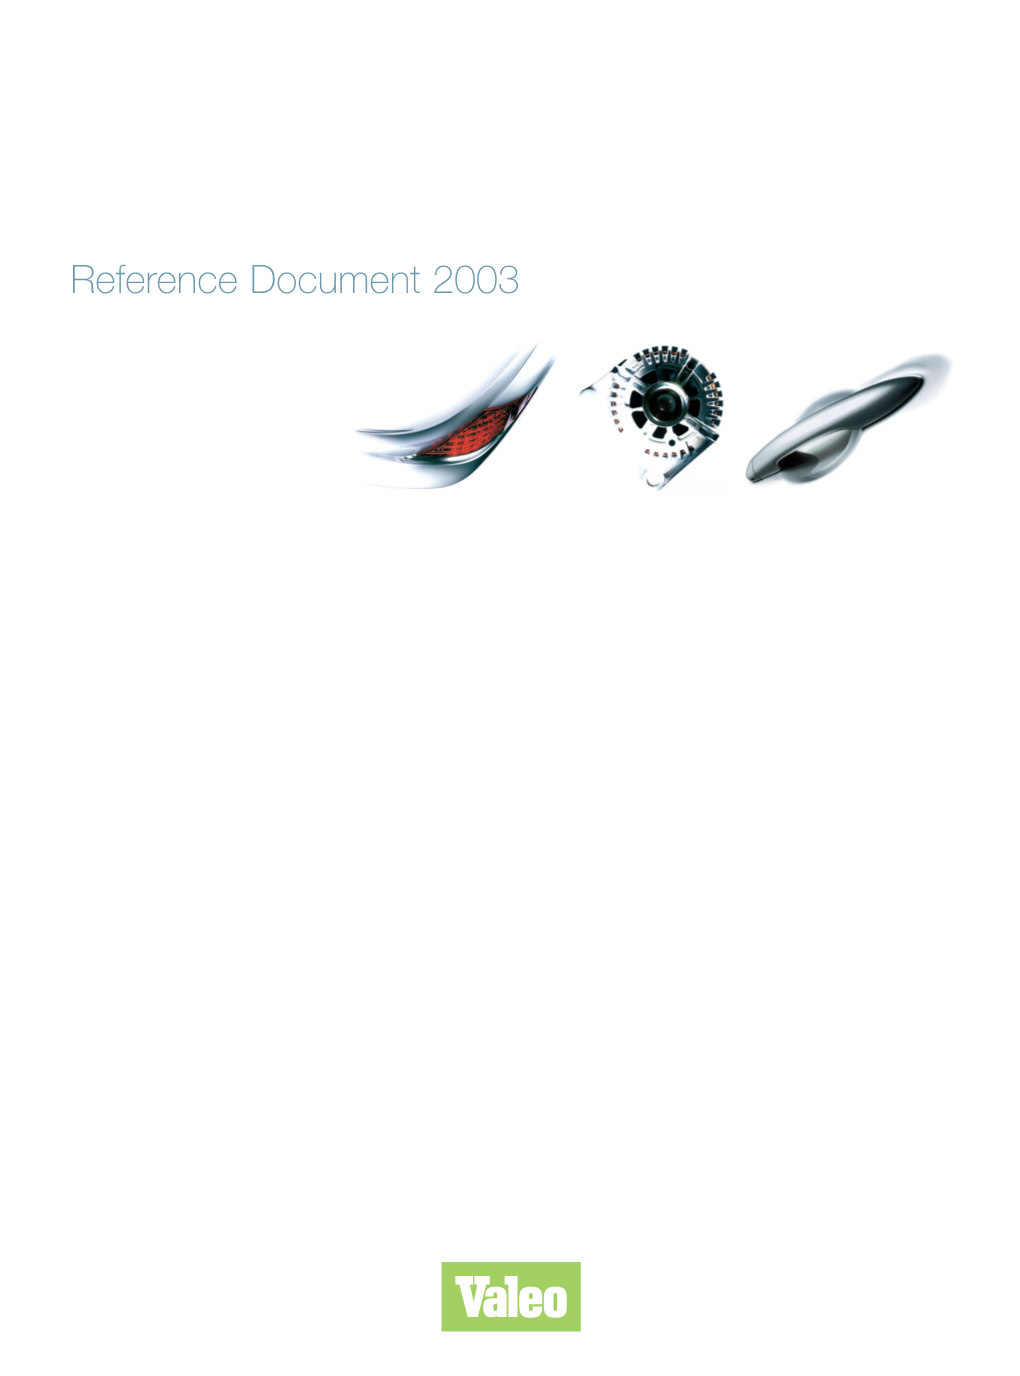 Reference Document 2003 CONTENTS